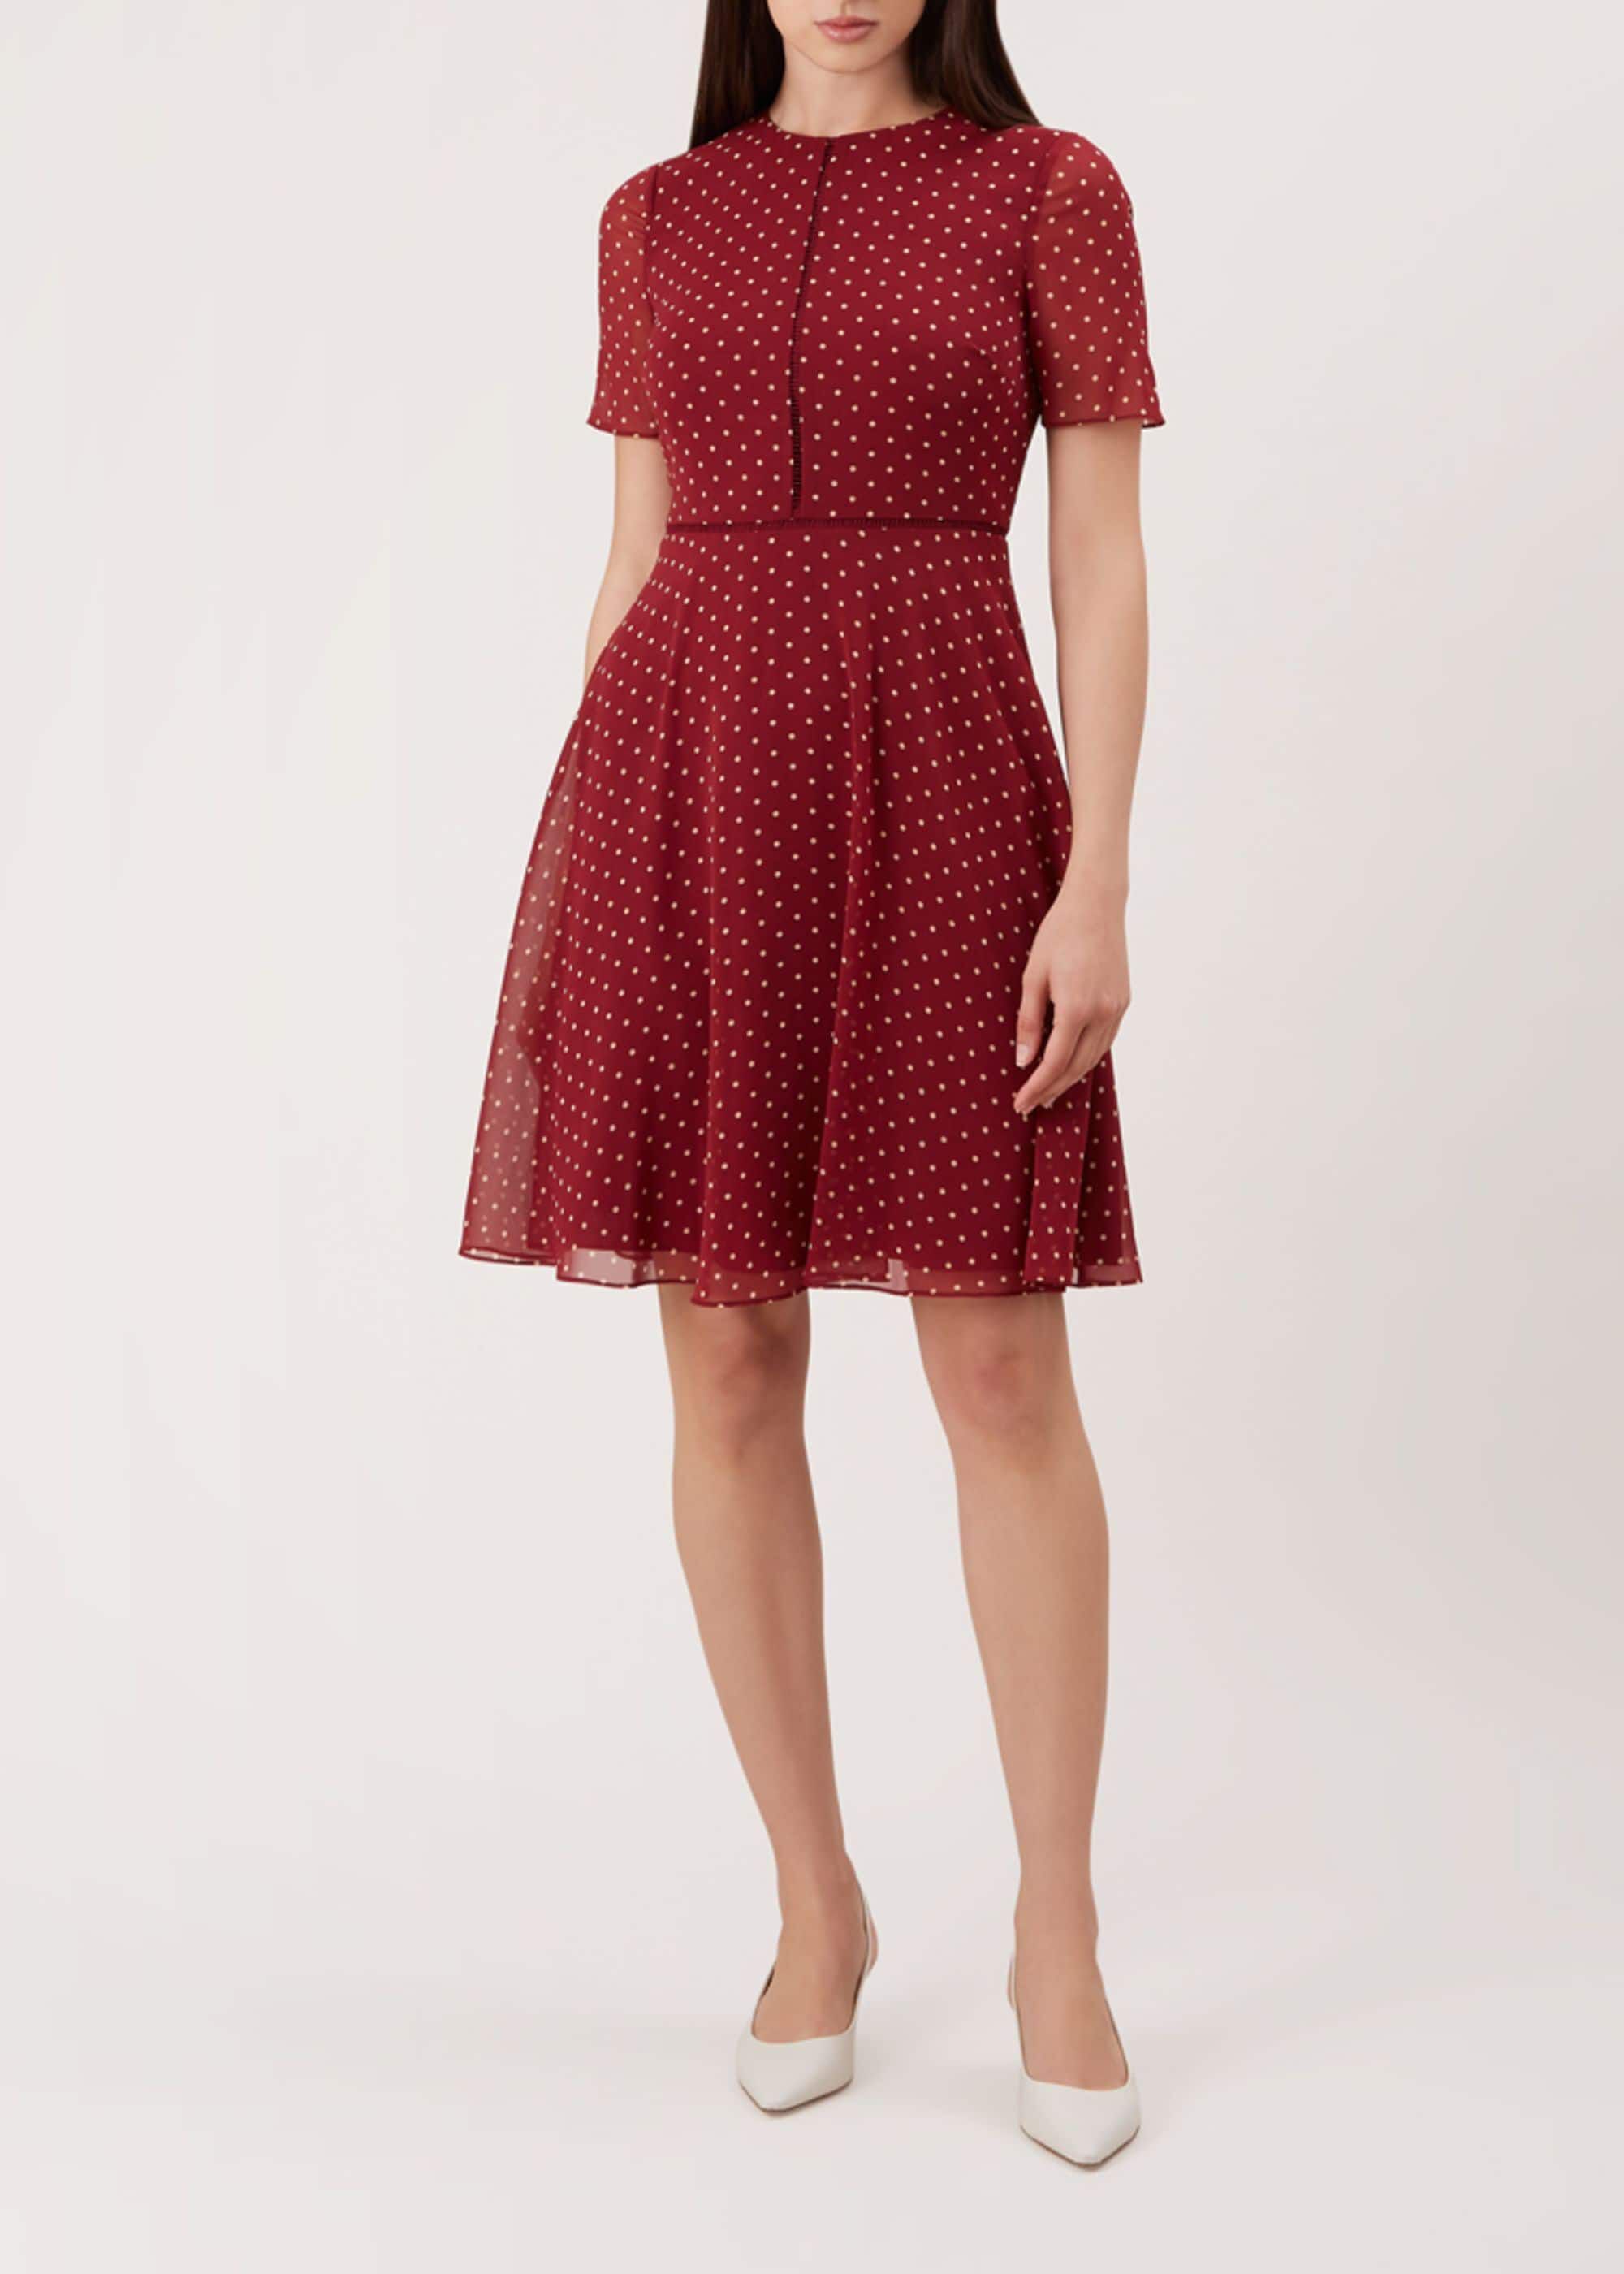 lord and taylor quiz dresses